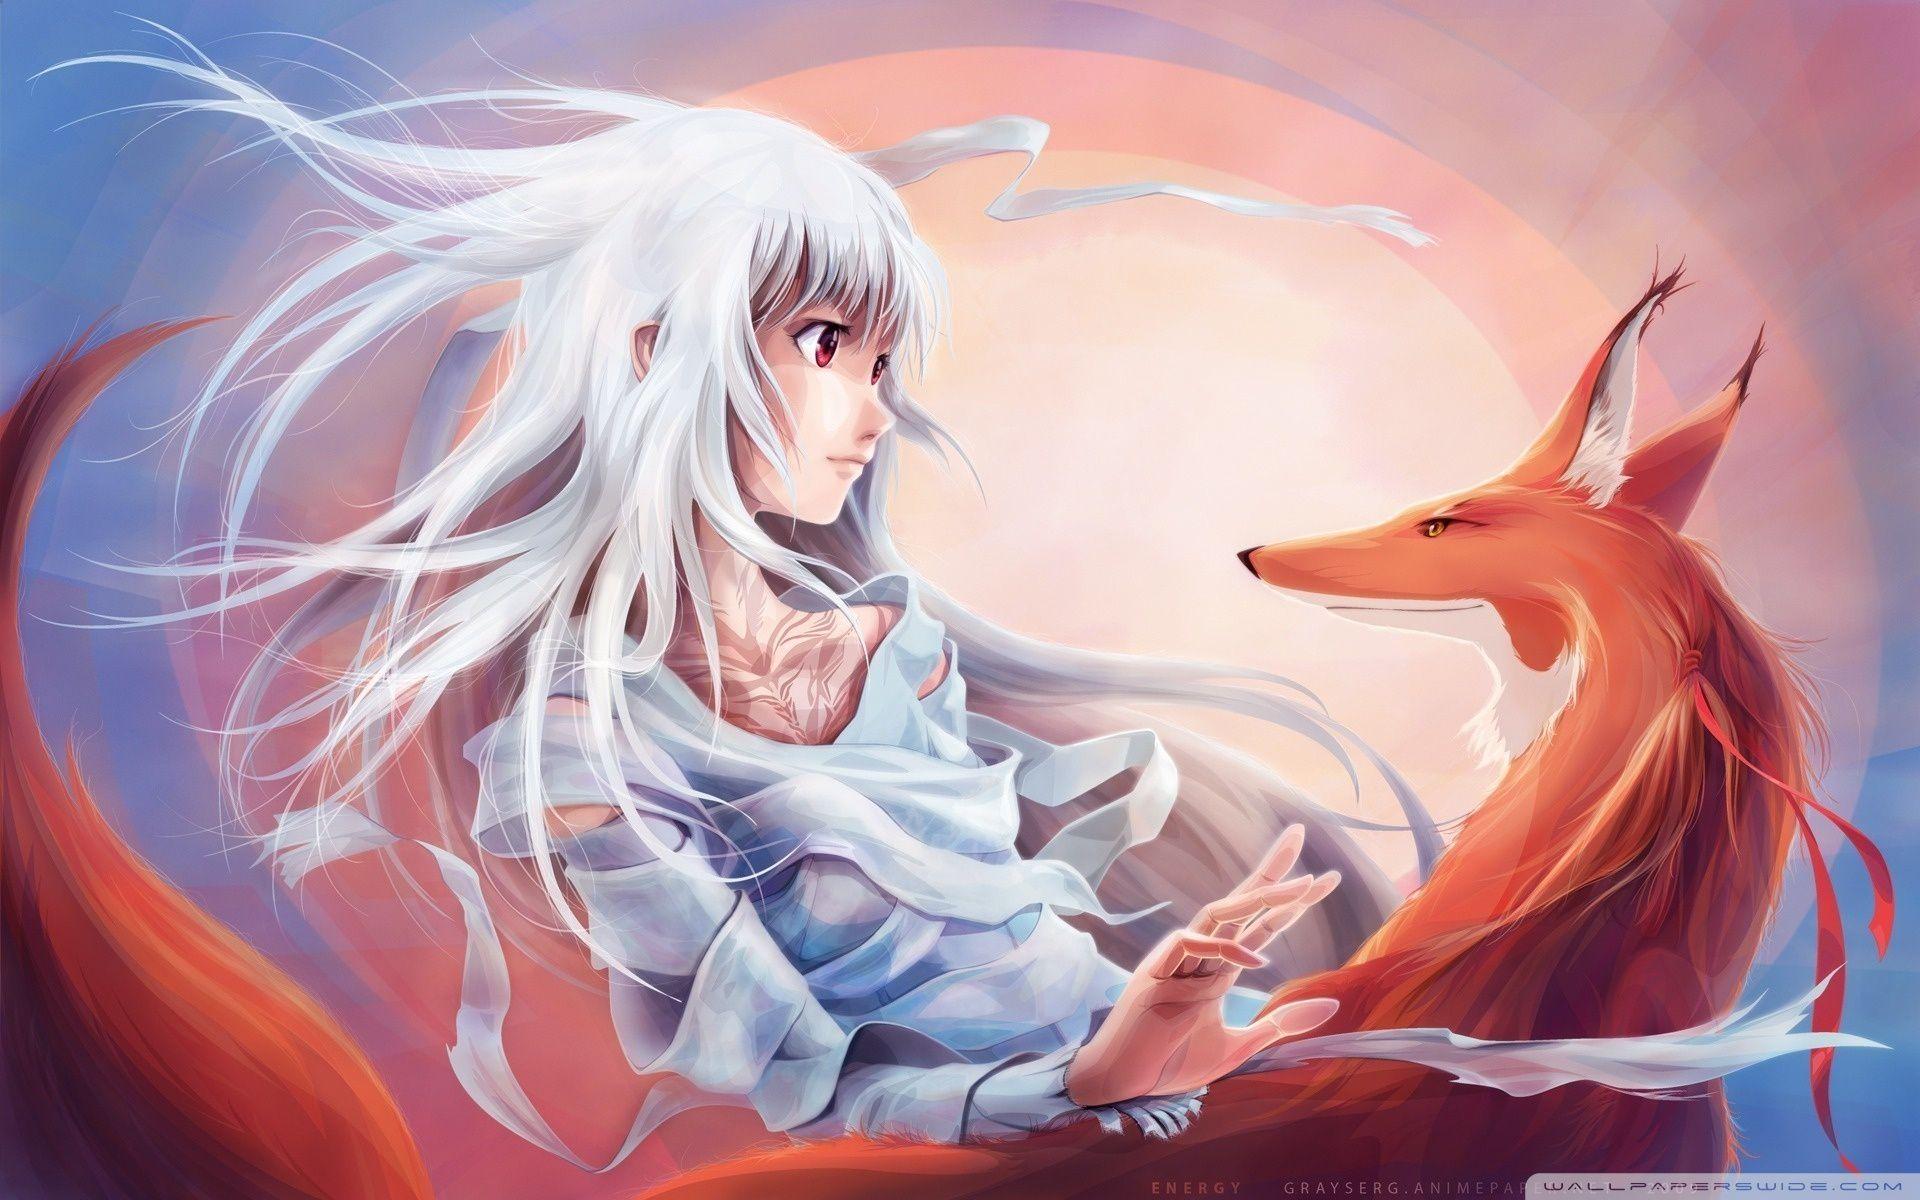 Anime Fox Wallpapers - Wallpaper Cave